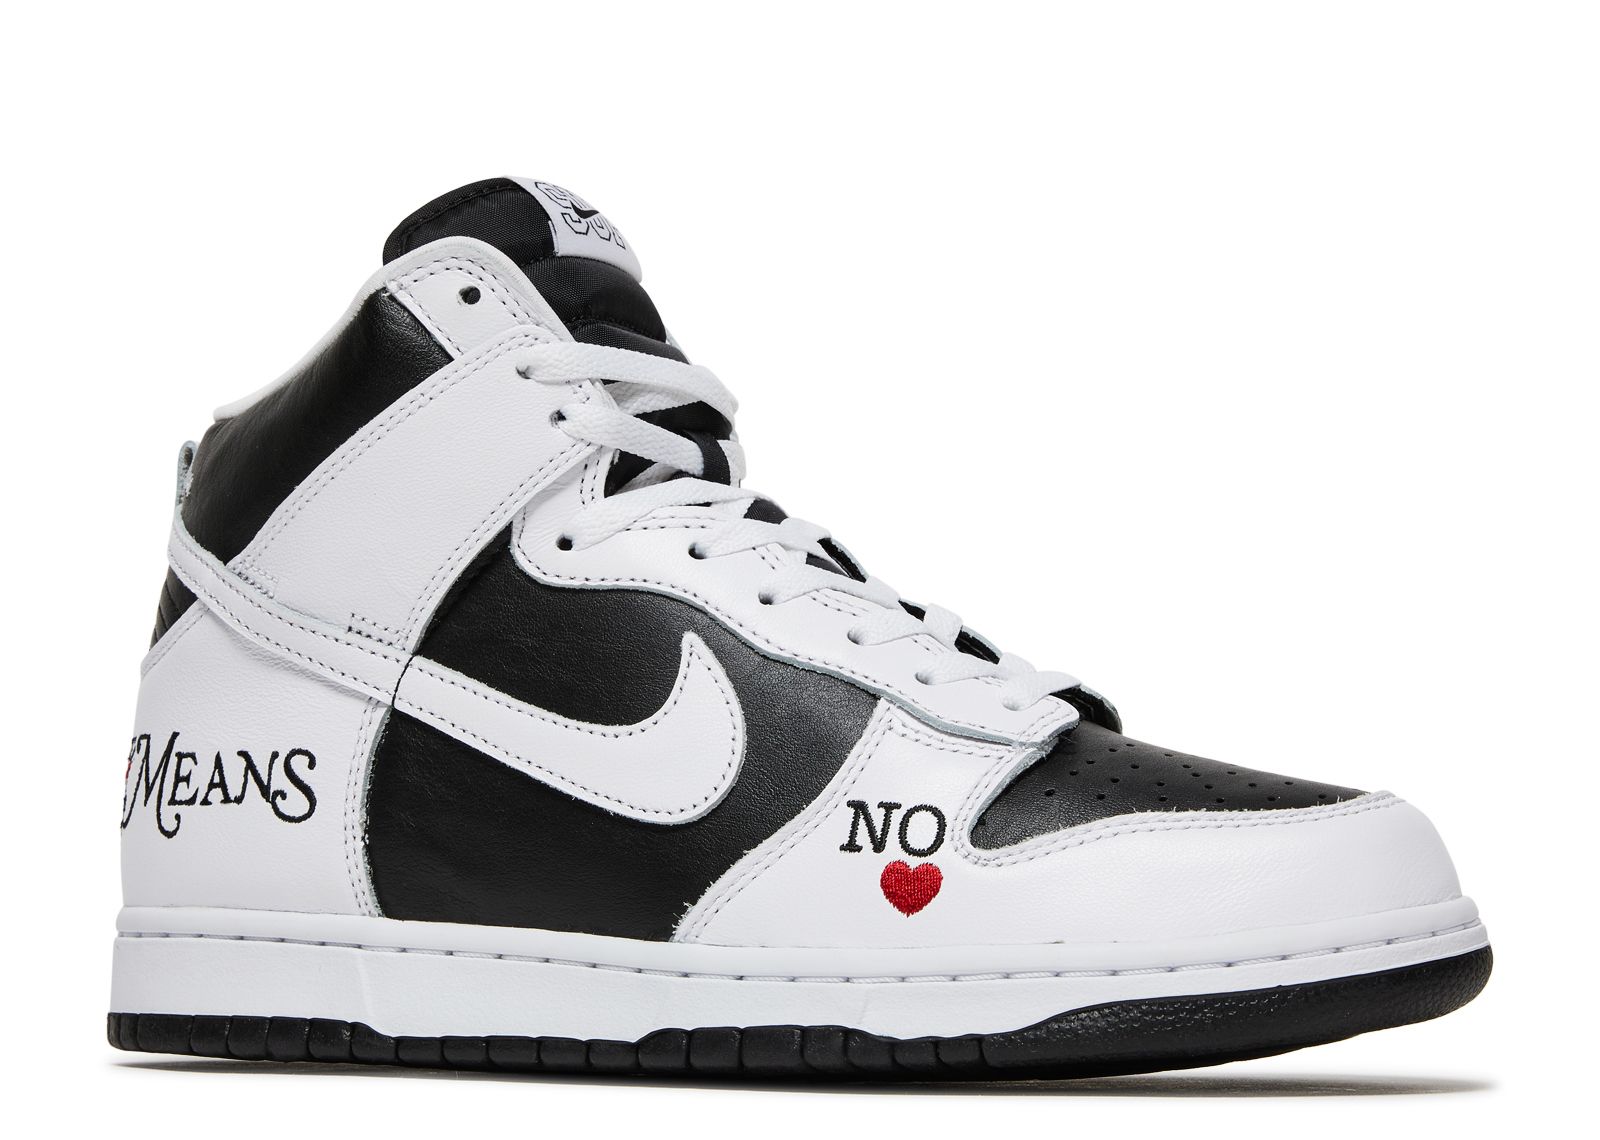 Supreme X Dunk High SB 'By Any Means Stormtrooper' - Nike - DN3741 